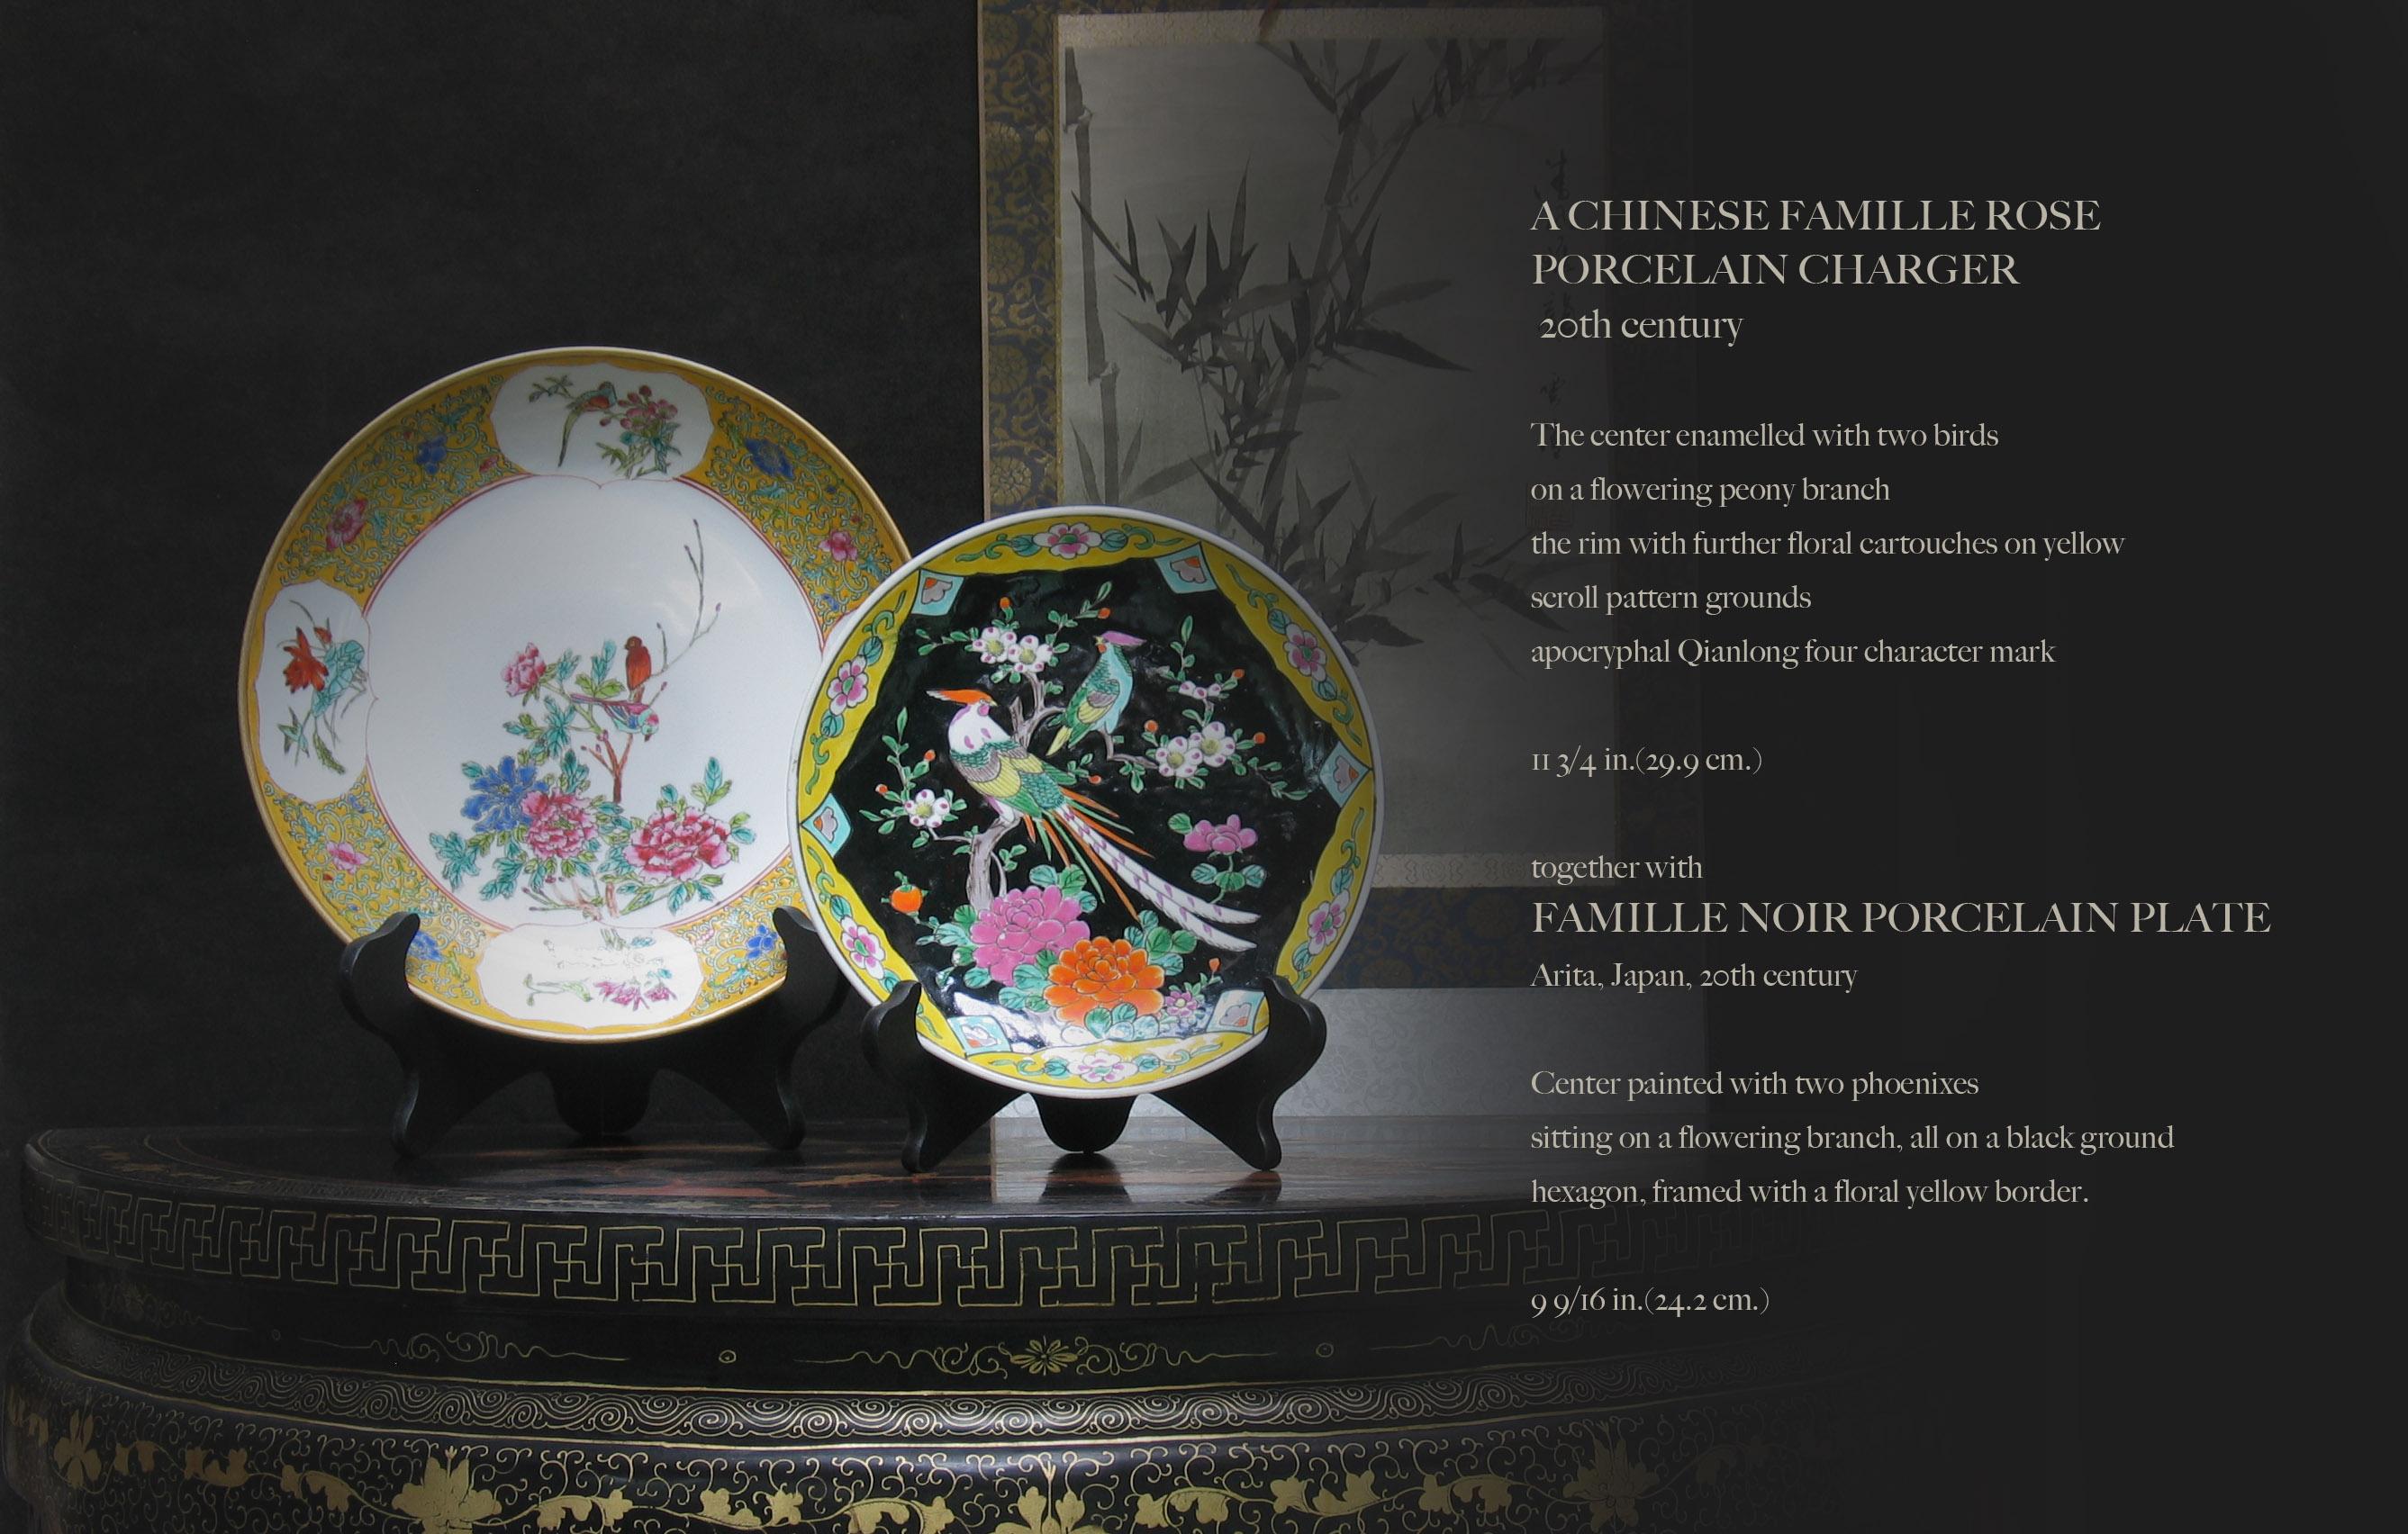 A Chinese famille rose
Porcelain charger
20th century.

The center enamelled with two birds 
on a flowering peony branch
the rim with further floral cartouches on yellow
scroll pattern grounds,
apocryphal Qianlong four character